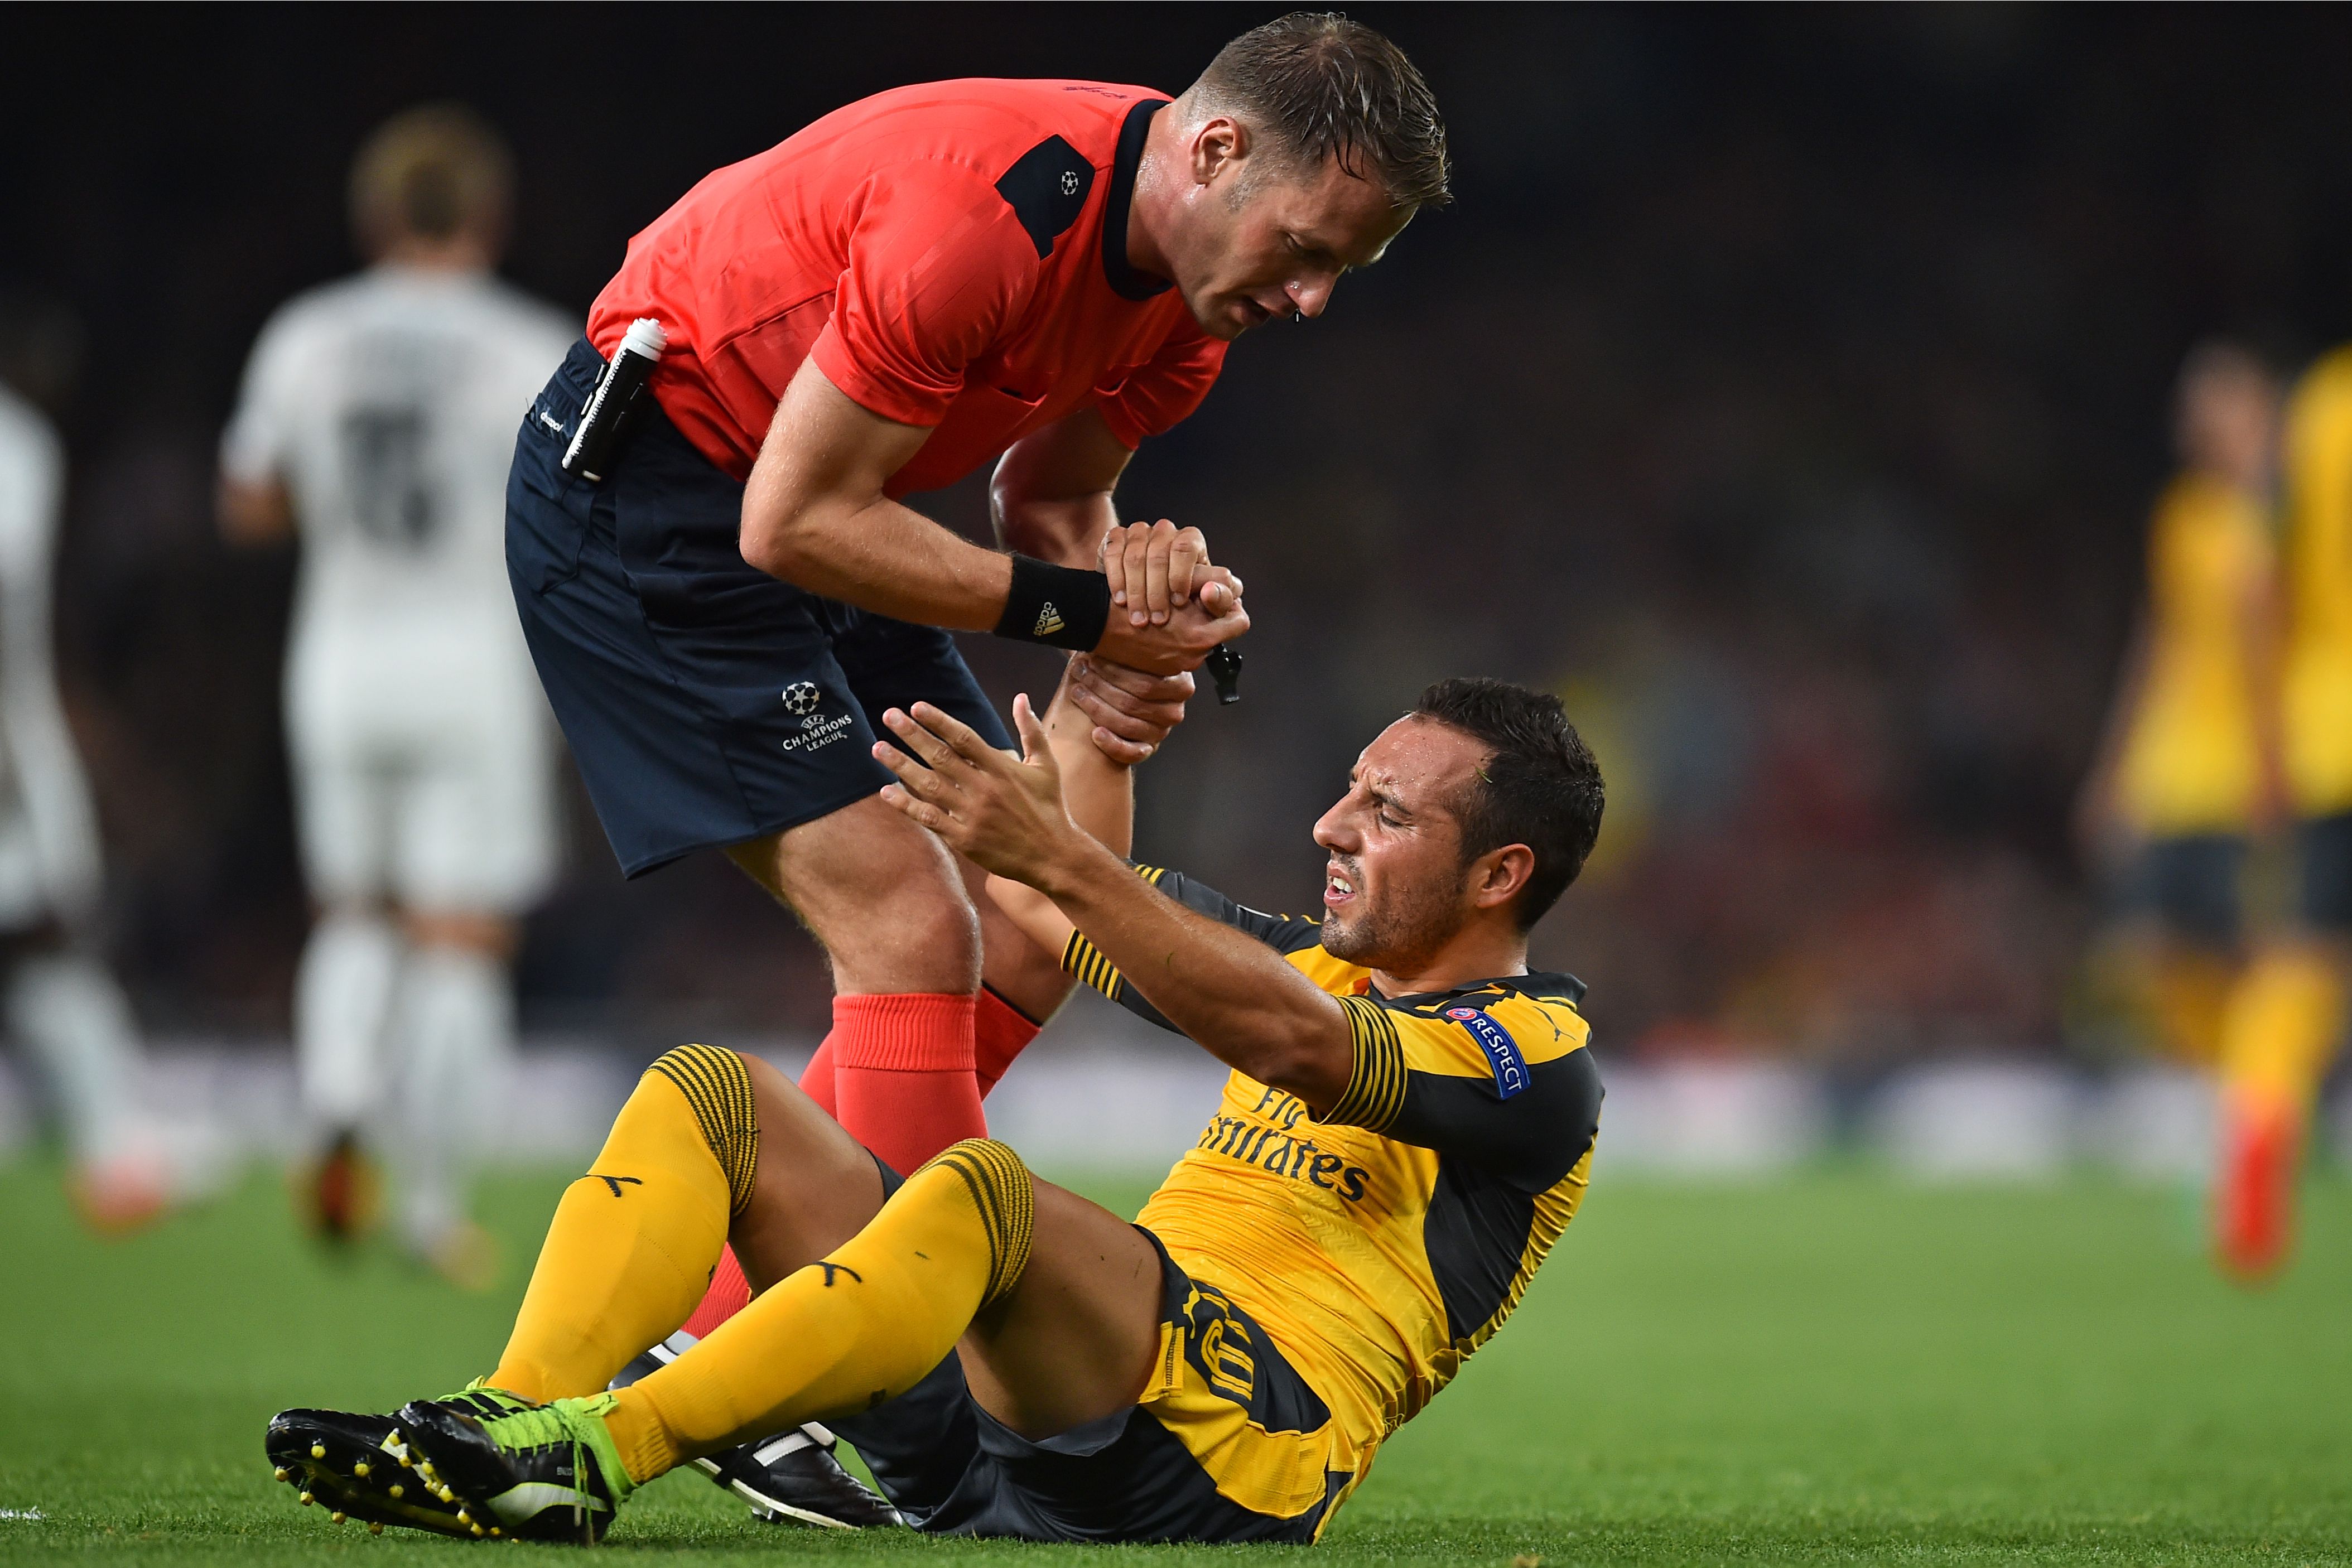 The trio of Spanish clubs would looking to pick Cazorla up in case Arsenal drops the ball with respect to his contract. (Picture Courtesy - AFP/Getty Images)